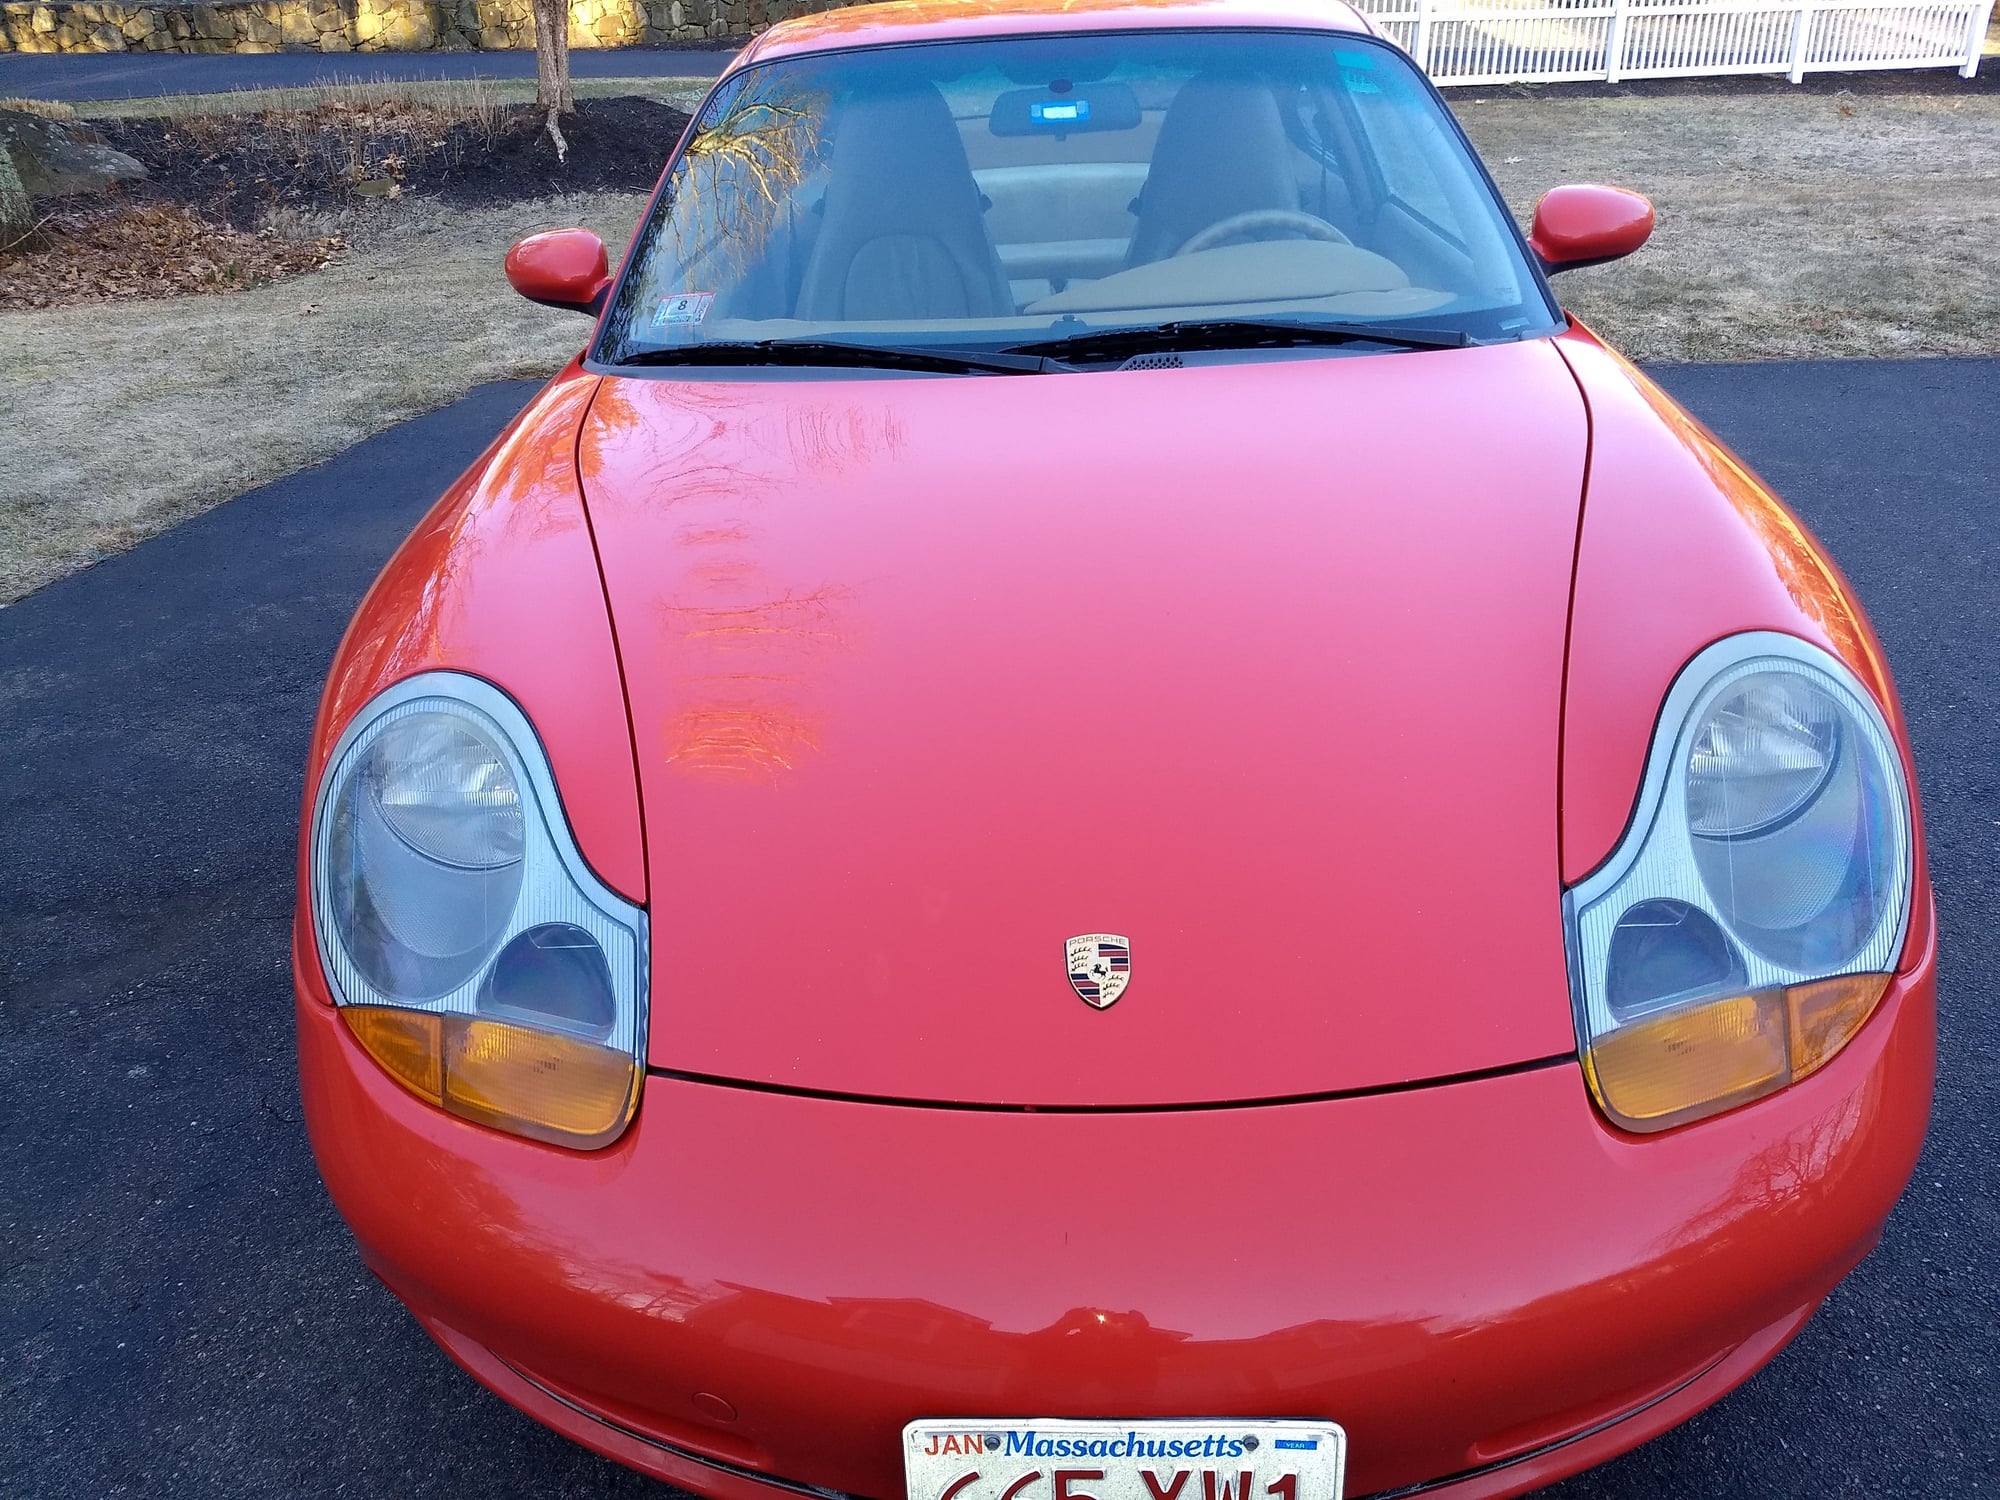 1999 Porsche 911 - All original, early build 996, great condition - Used - VIN wpoaa2995xs620565 - 88,000 Miles - 6 cyl - 2WD - Manual - Coupe - Red - North Andover, MA 01845, United States